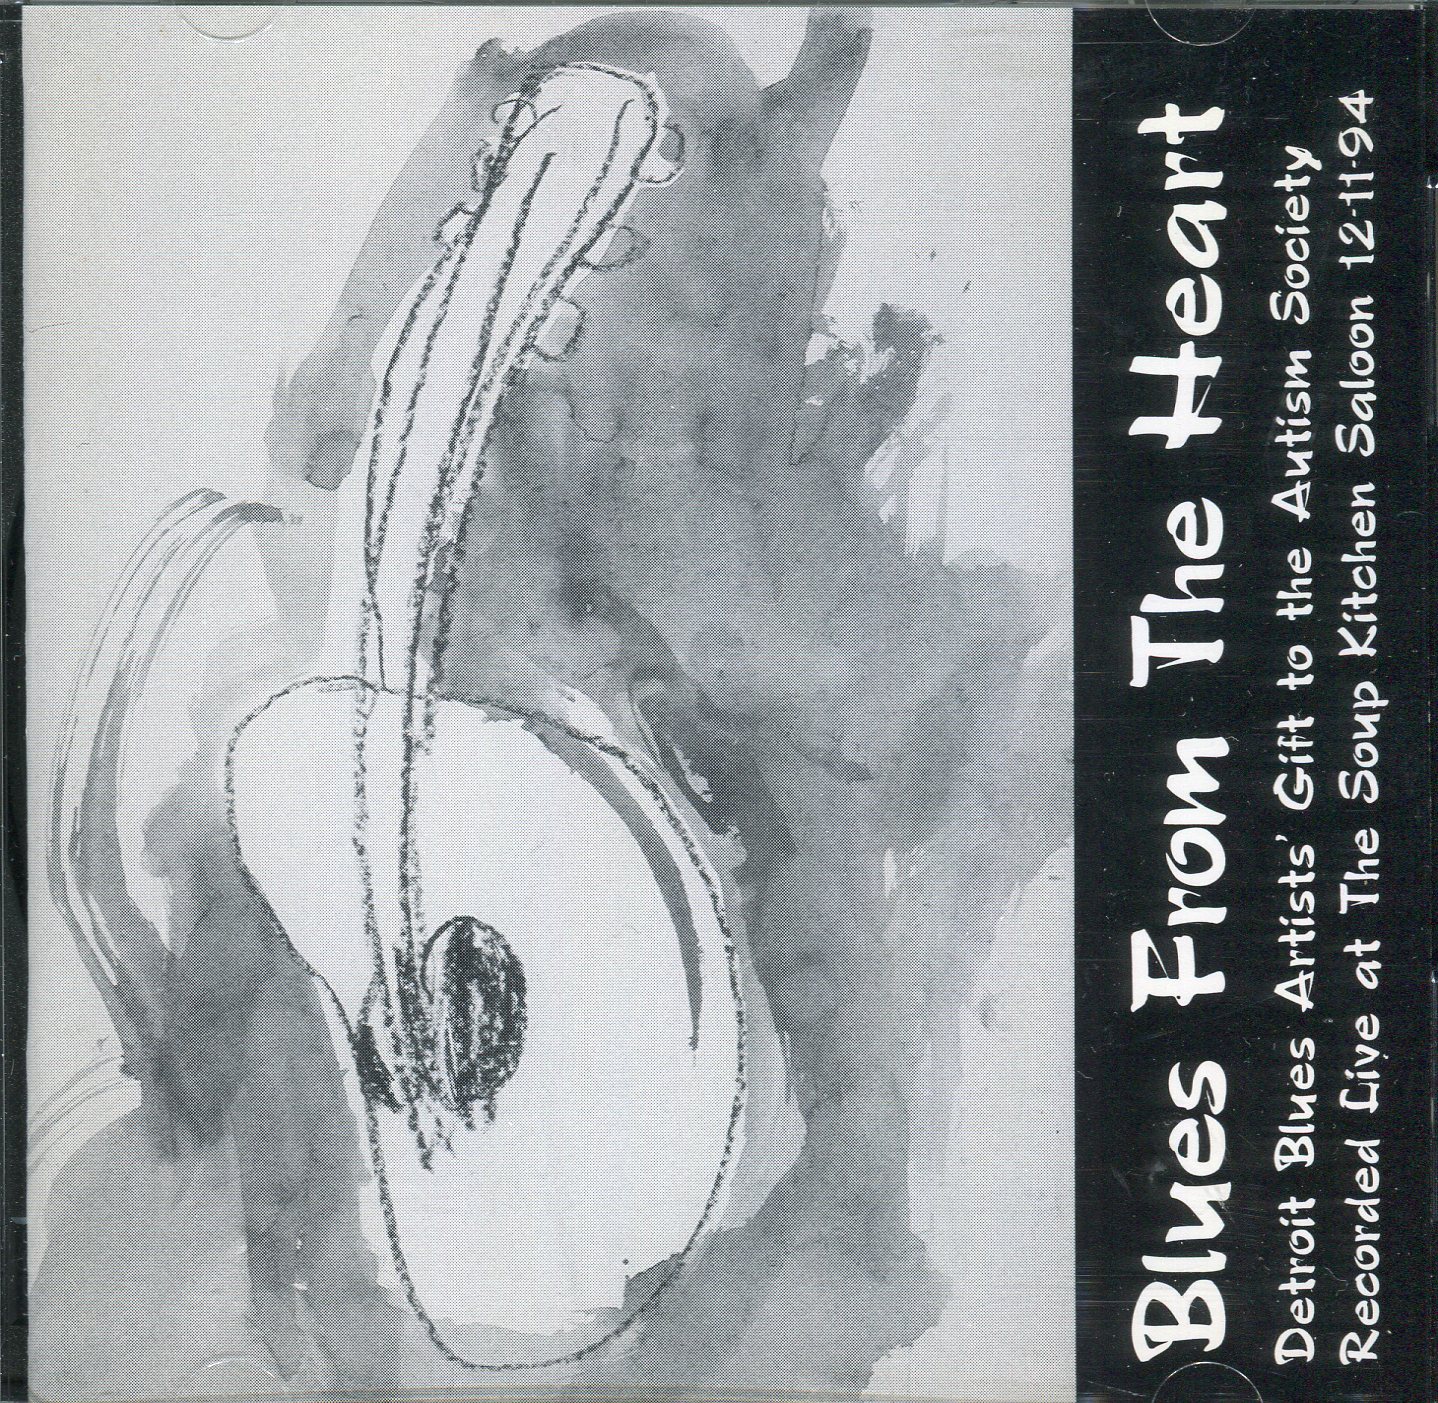 Detroit Blues Artists - Blues From The Heart (compilation, 1995)